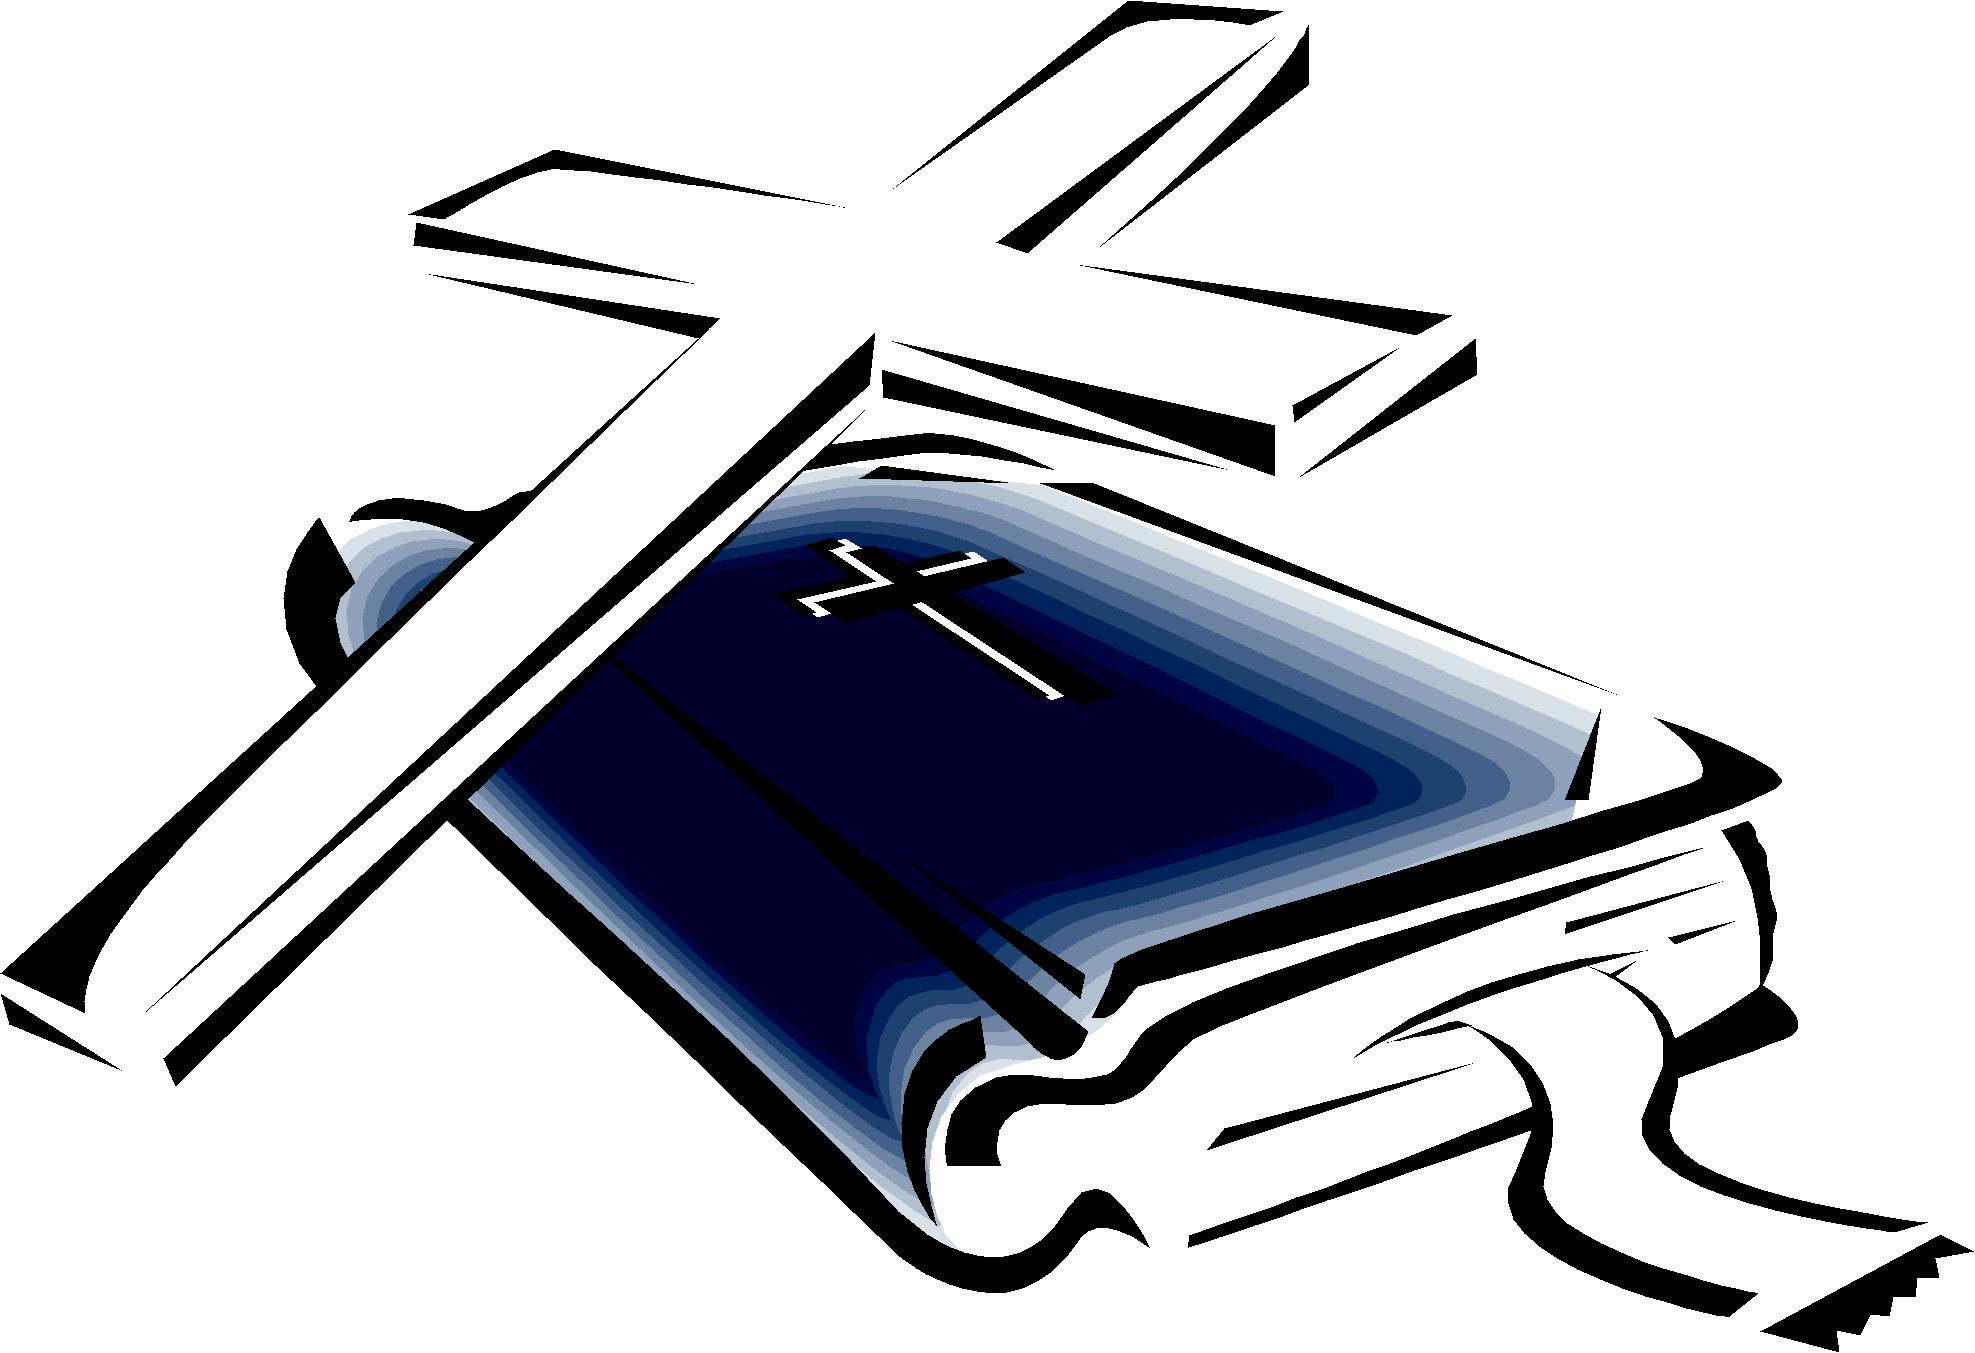 Bible And Cross Clip Art - Cliparts.co